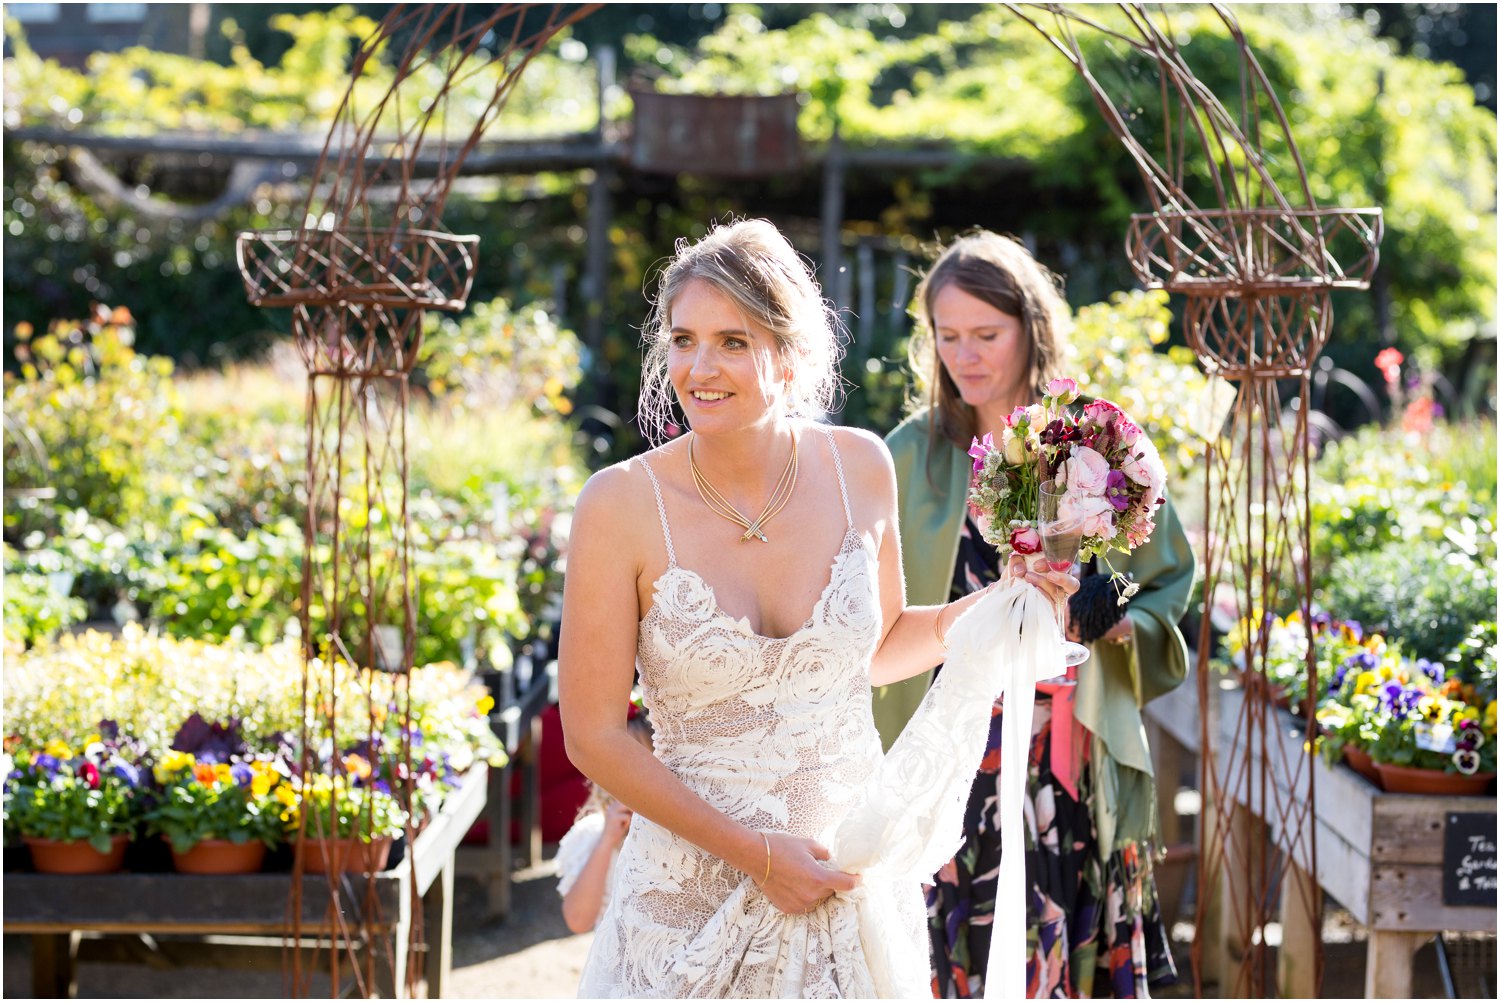 bride arrives at reception hosted by Petersham Nurseries in Richmond